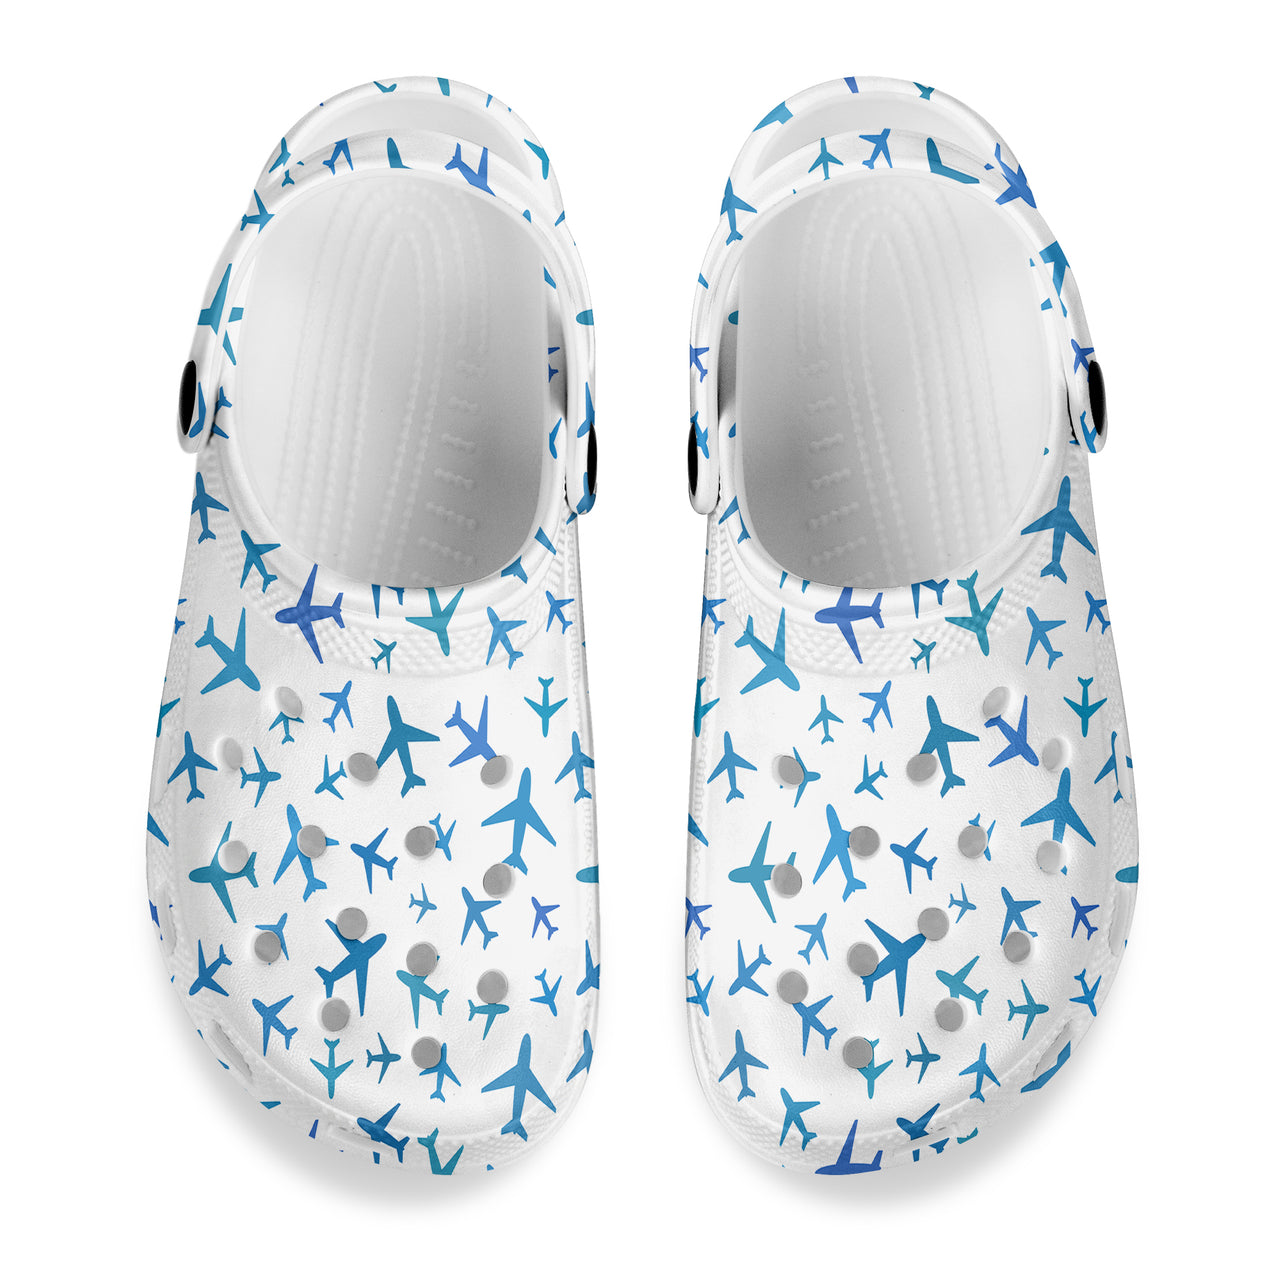 Many Airplanes White Designed Hole Shoes & Slippers (MEN)